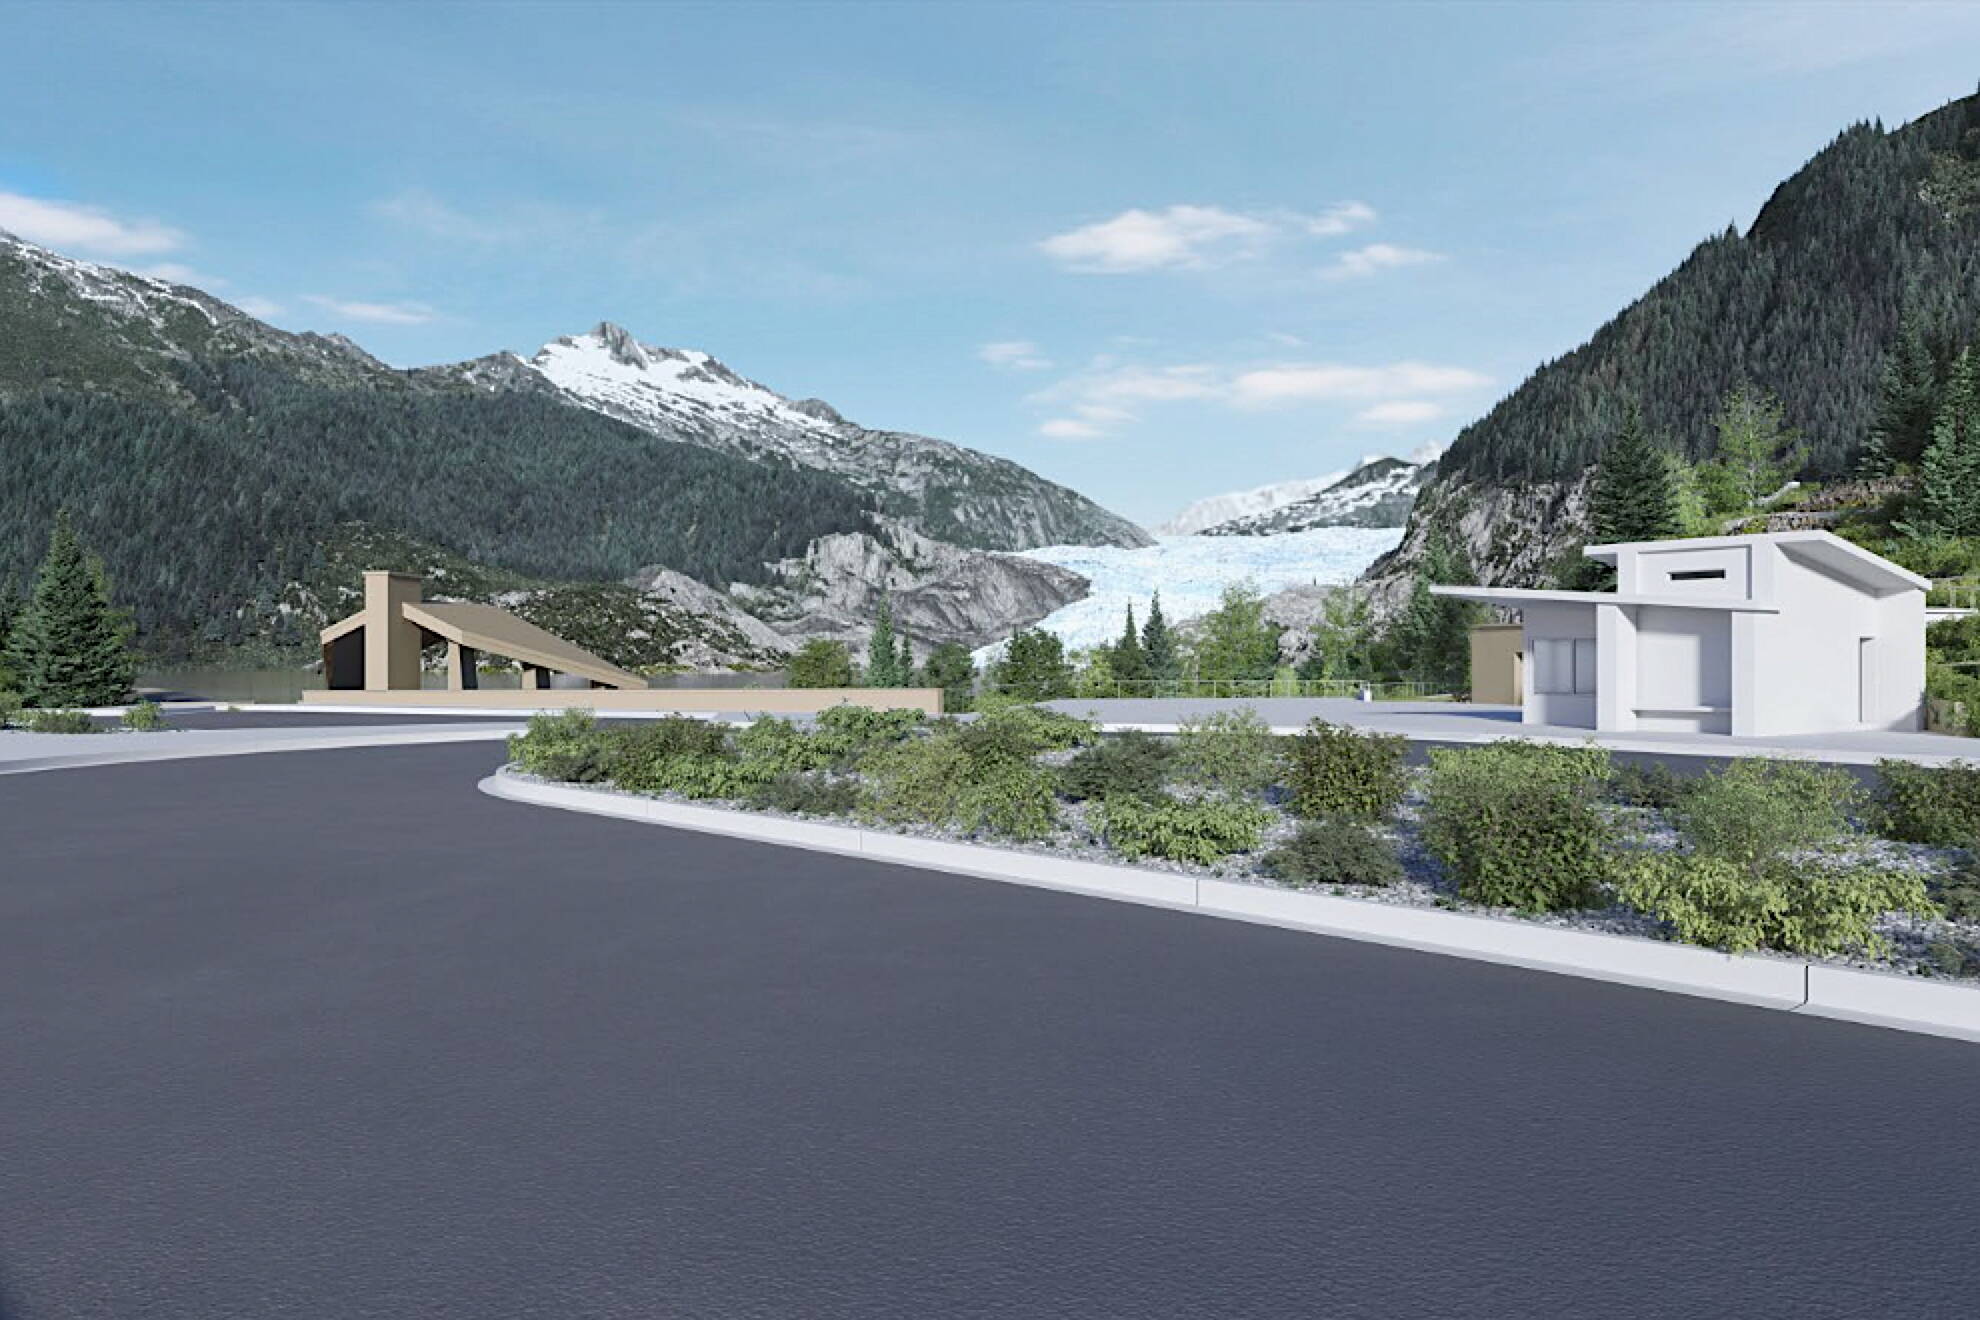 Image from the Notice of Decision published by the U.S. Forest Service
An illustration shows a new Welcome Center and plaza area at the Mendenhall Glacier Recreation Area as proposed in May. The facilities approved in a Notice of Decision on Thursday are similar, but are being relocated further from the face of the glacier to the existing commercial overflow parking lot.